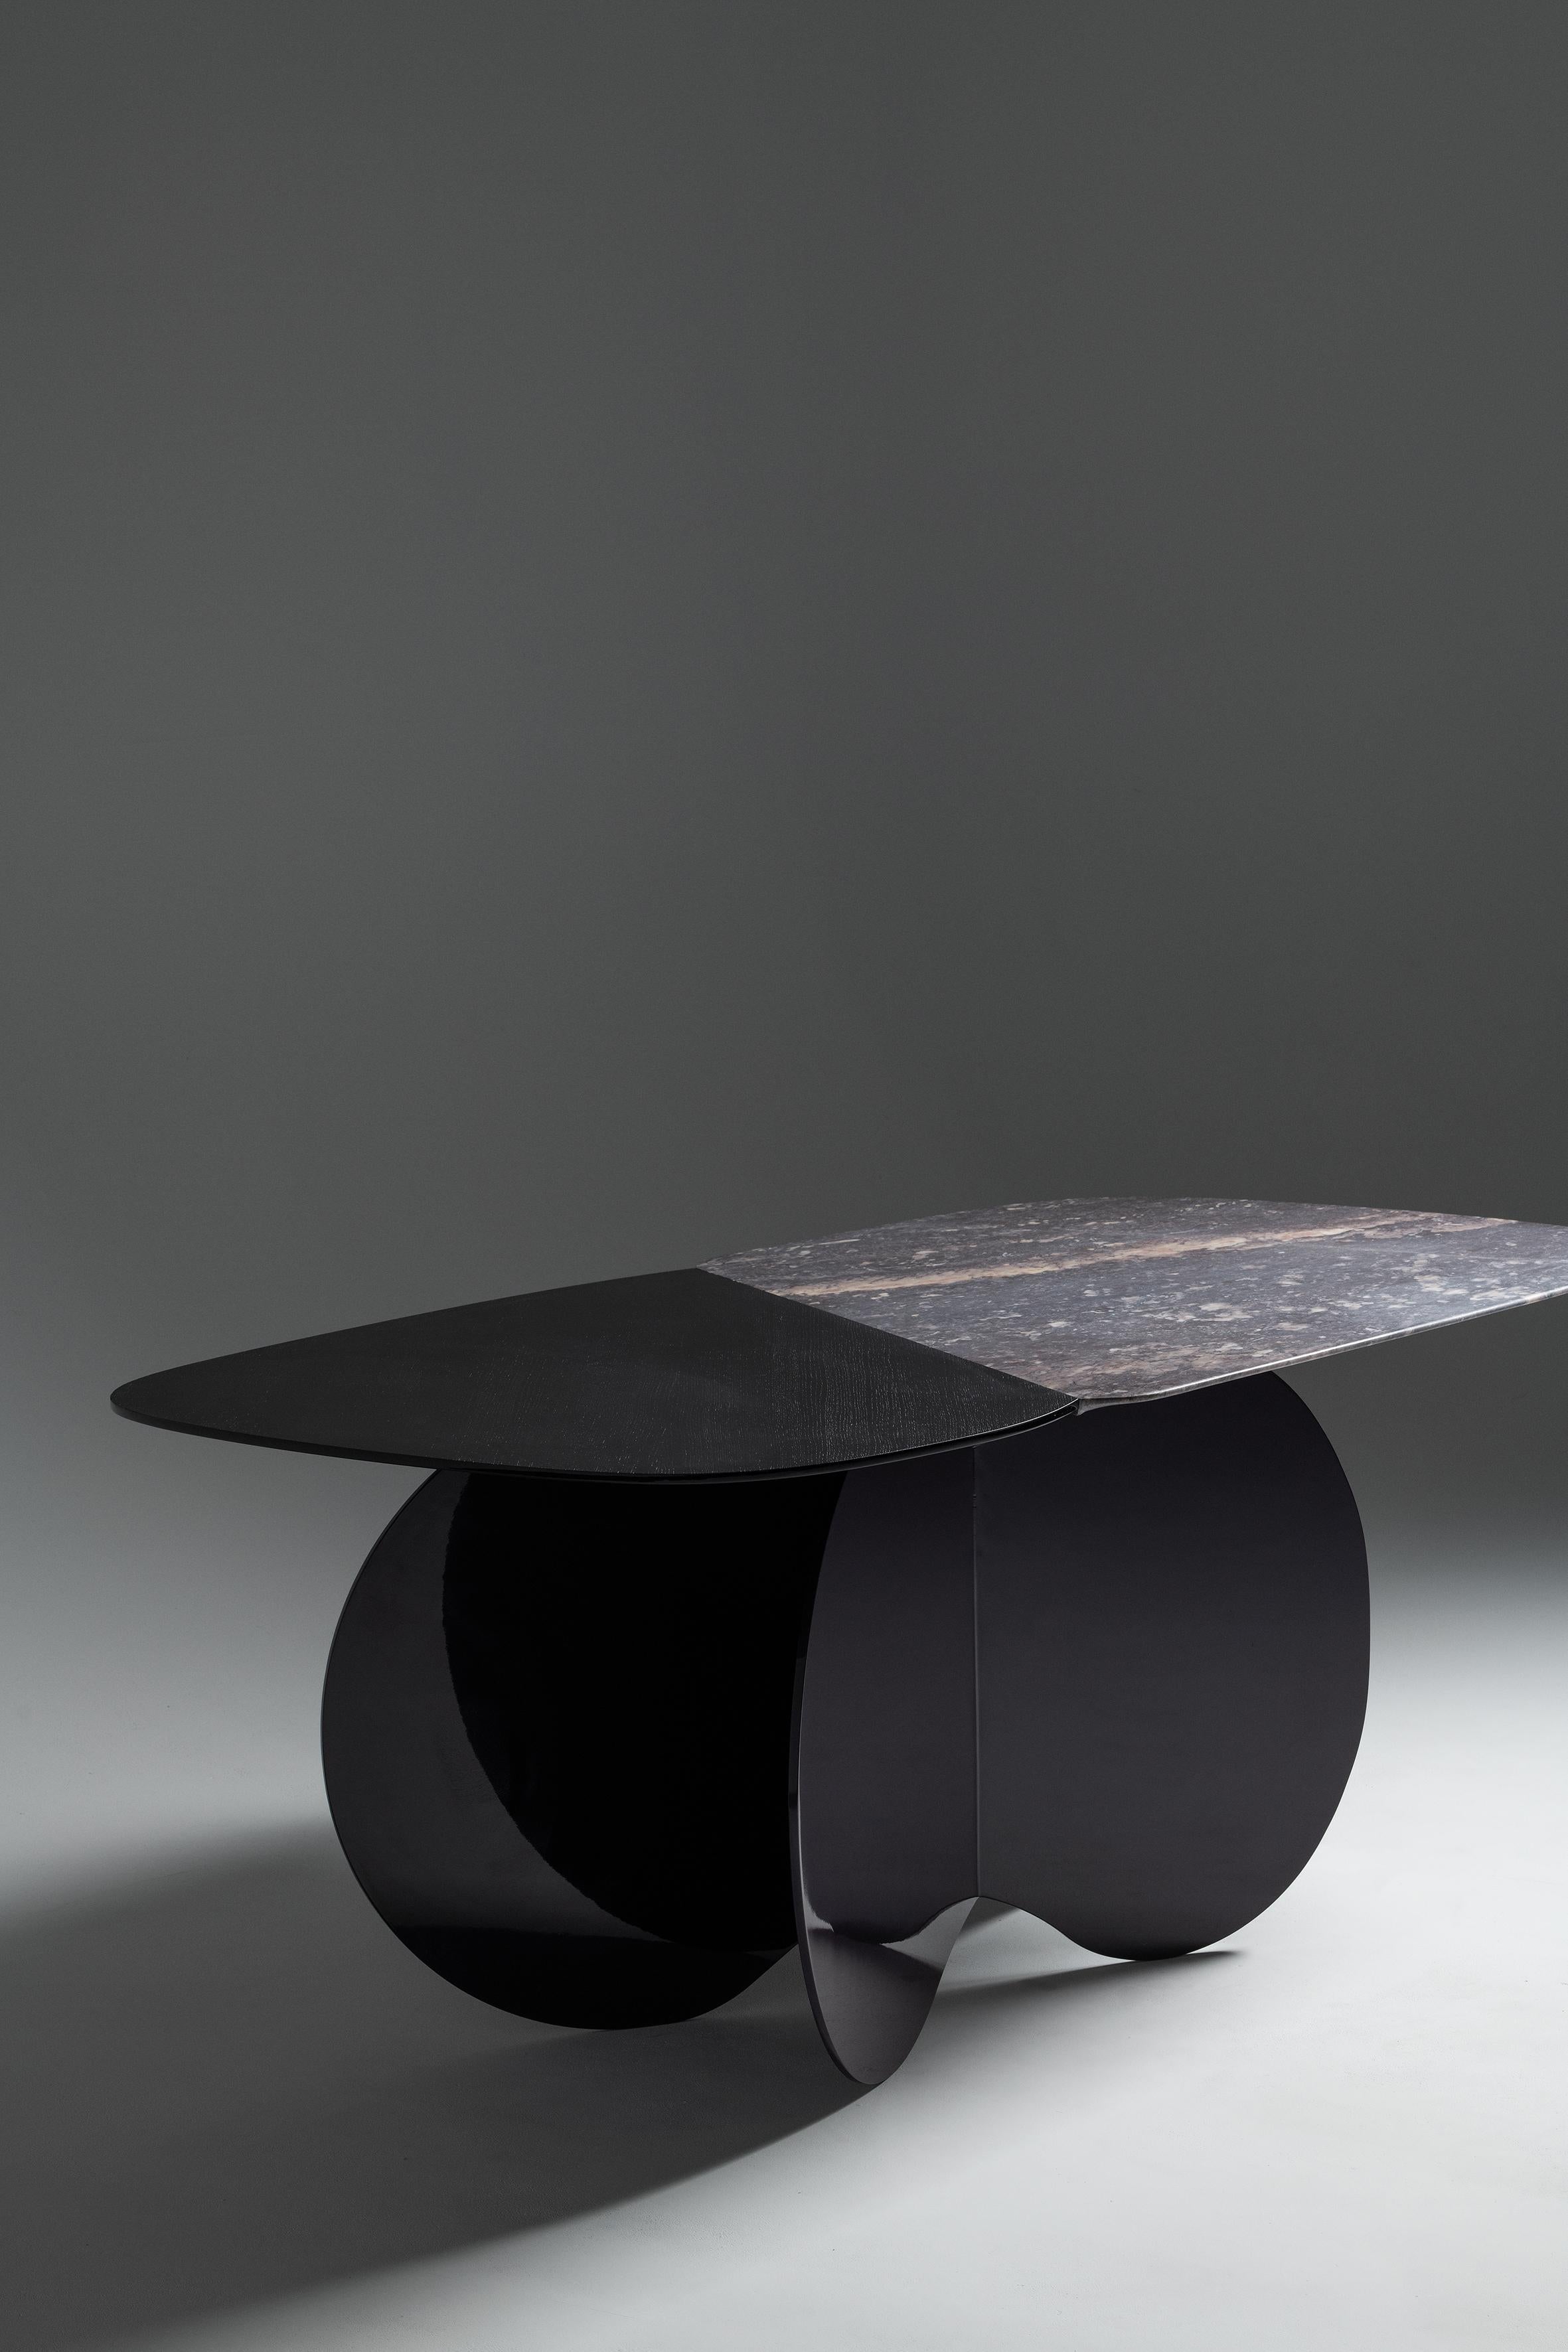 Oman table, Memphis, marble, France, Le Berre Vevaud
Empreinte Collection
Epoxy steel base, glossy aubergine lacquered finish
Brushed black oak and lilac marble top, softened finish

For their second collection, Raphaël Le Berre and Thomas